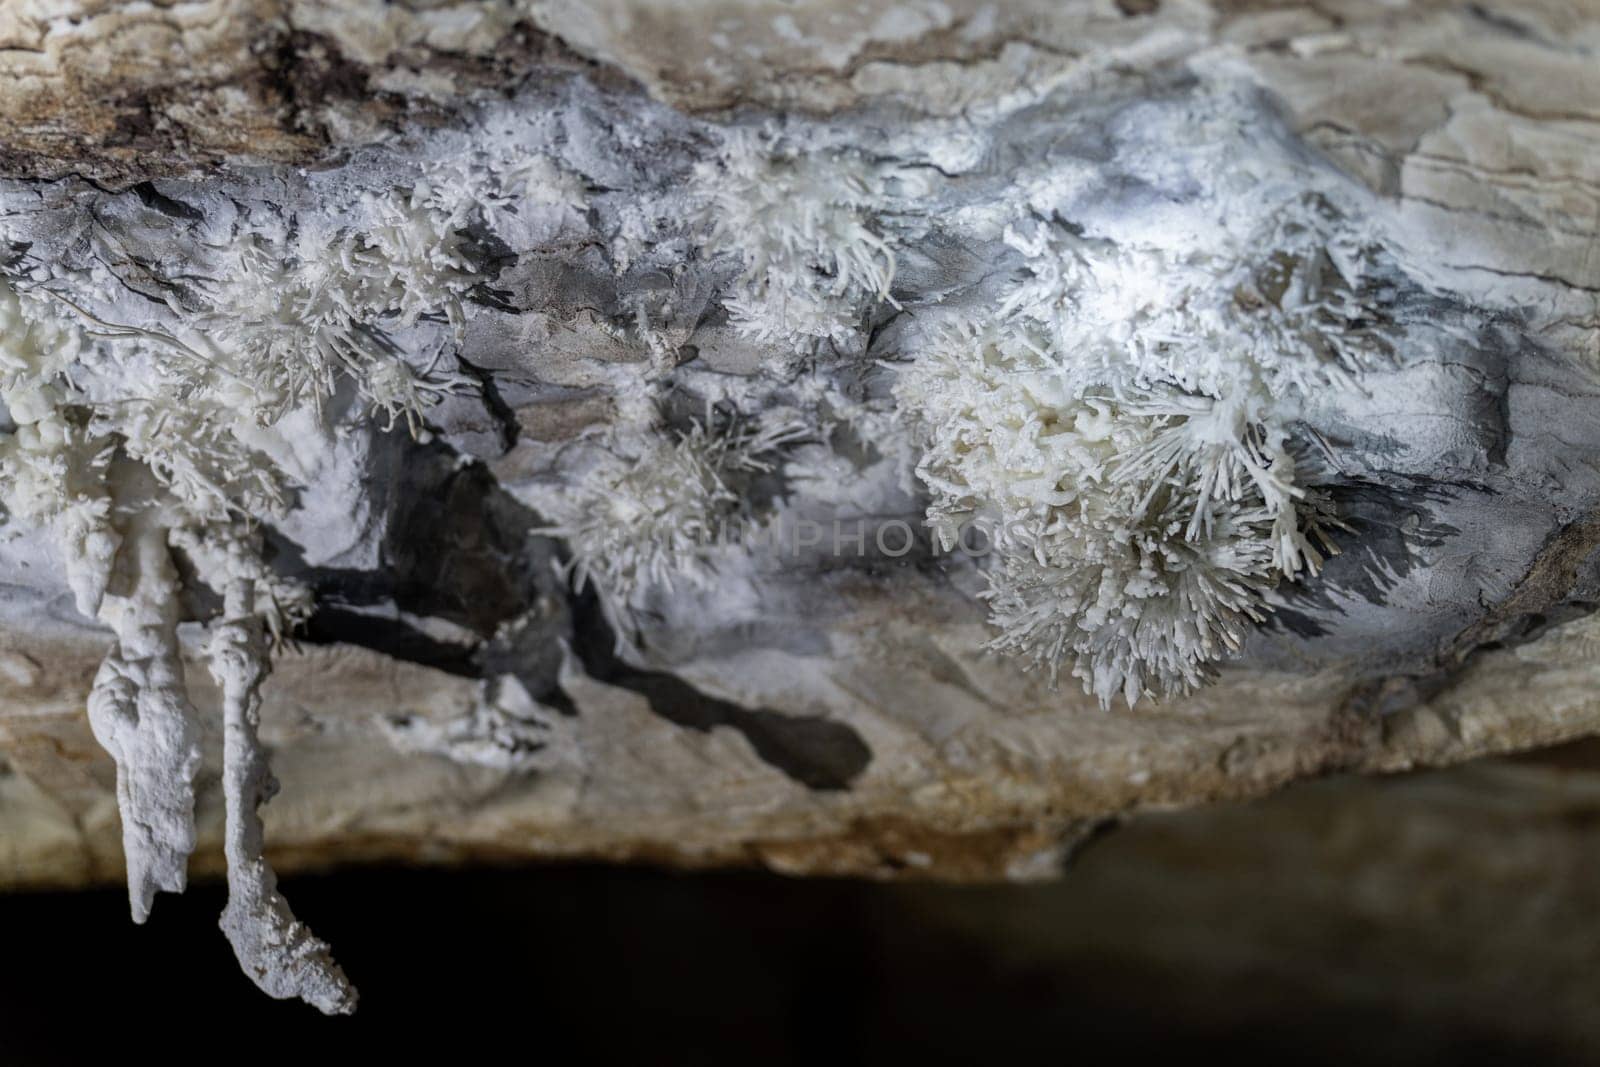 Exploration of a cave's crystalline formations, highlighting the natural art in geology.